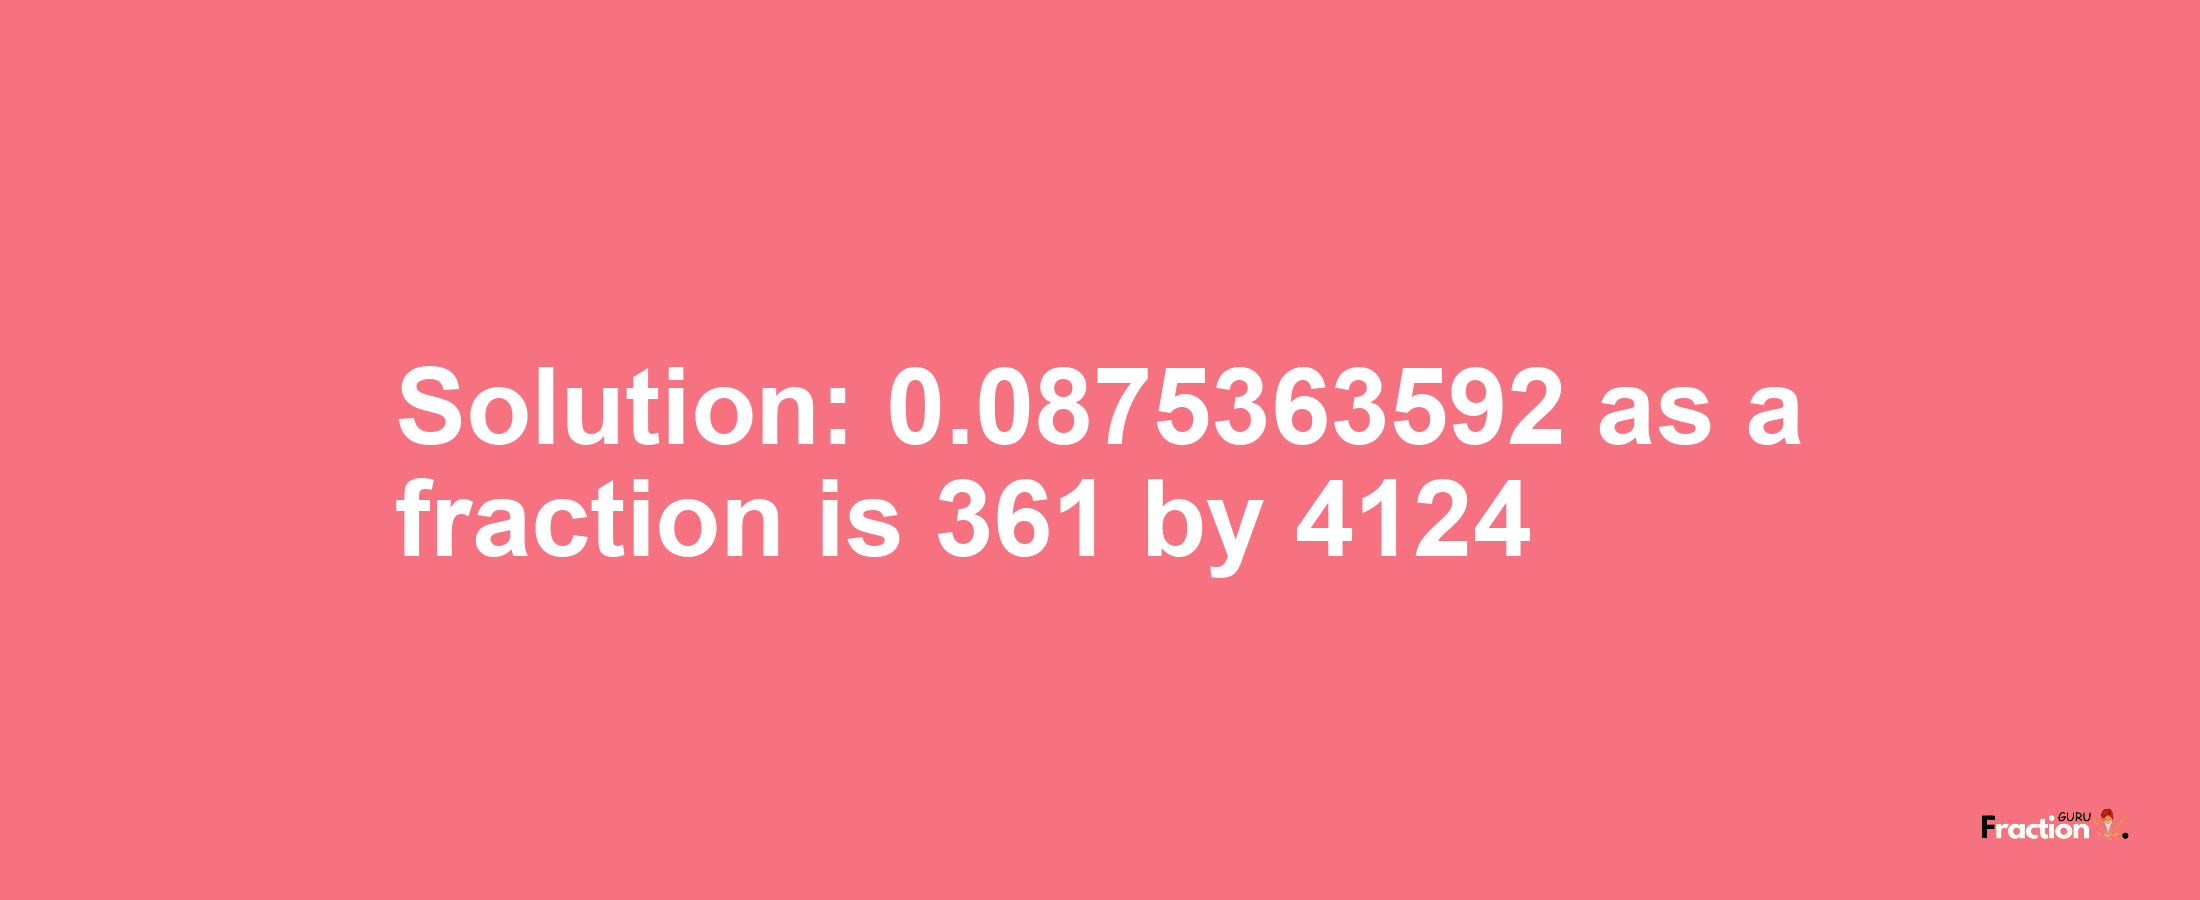 Solution:0.0875363592 as a fraction is 361/4124